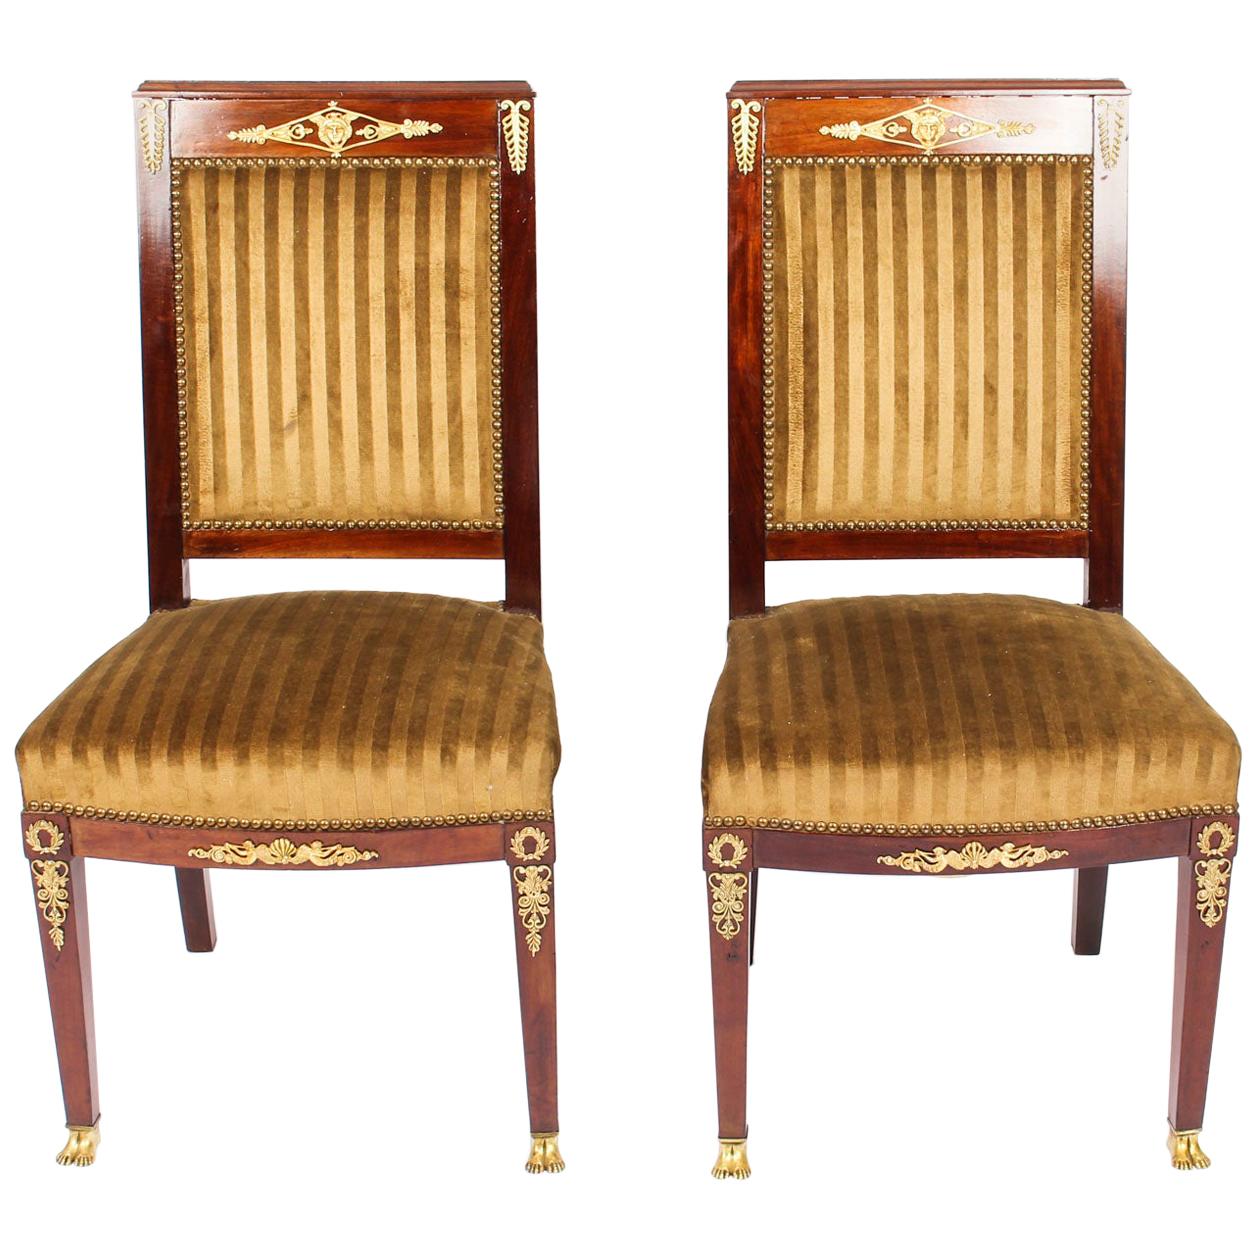 Antique Pair of Empire Ormolu Mounted Side Chairs, 19th Century